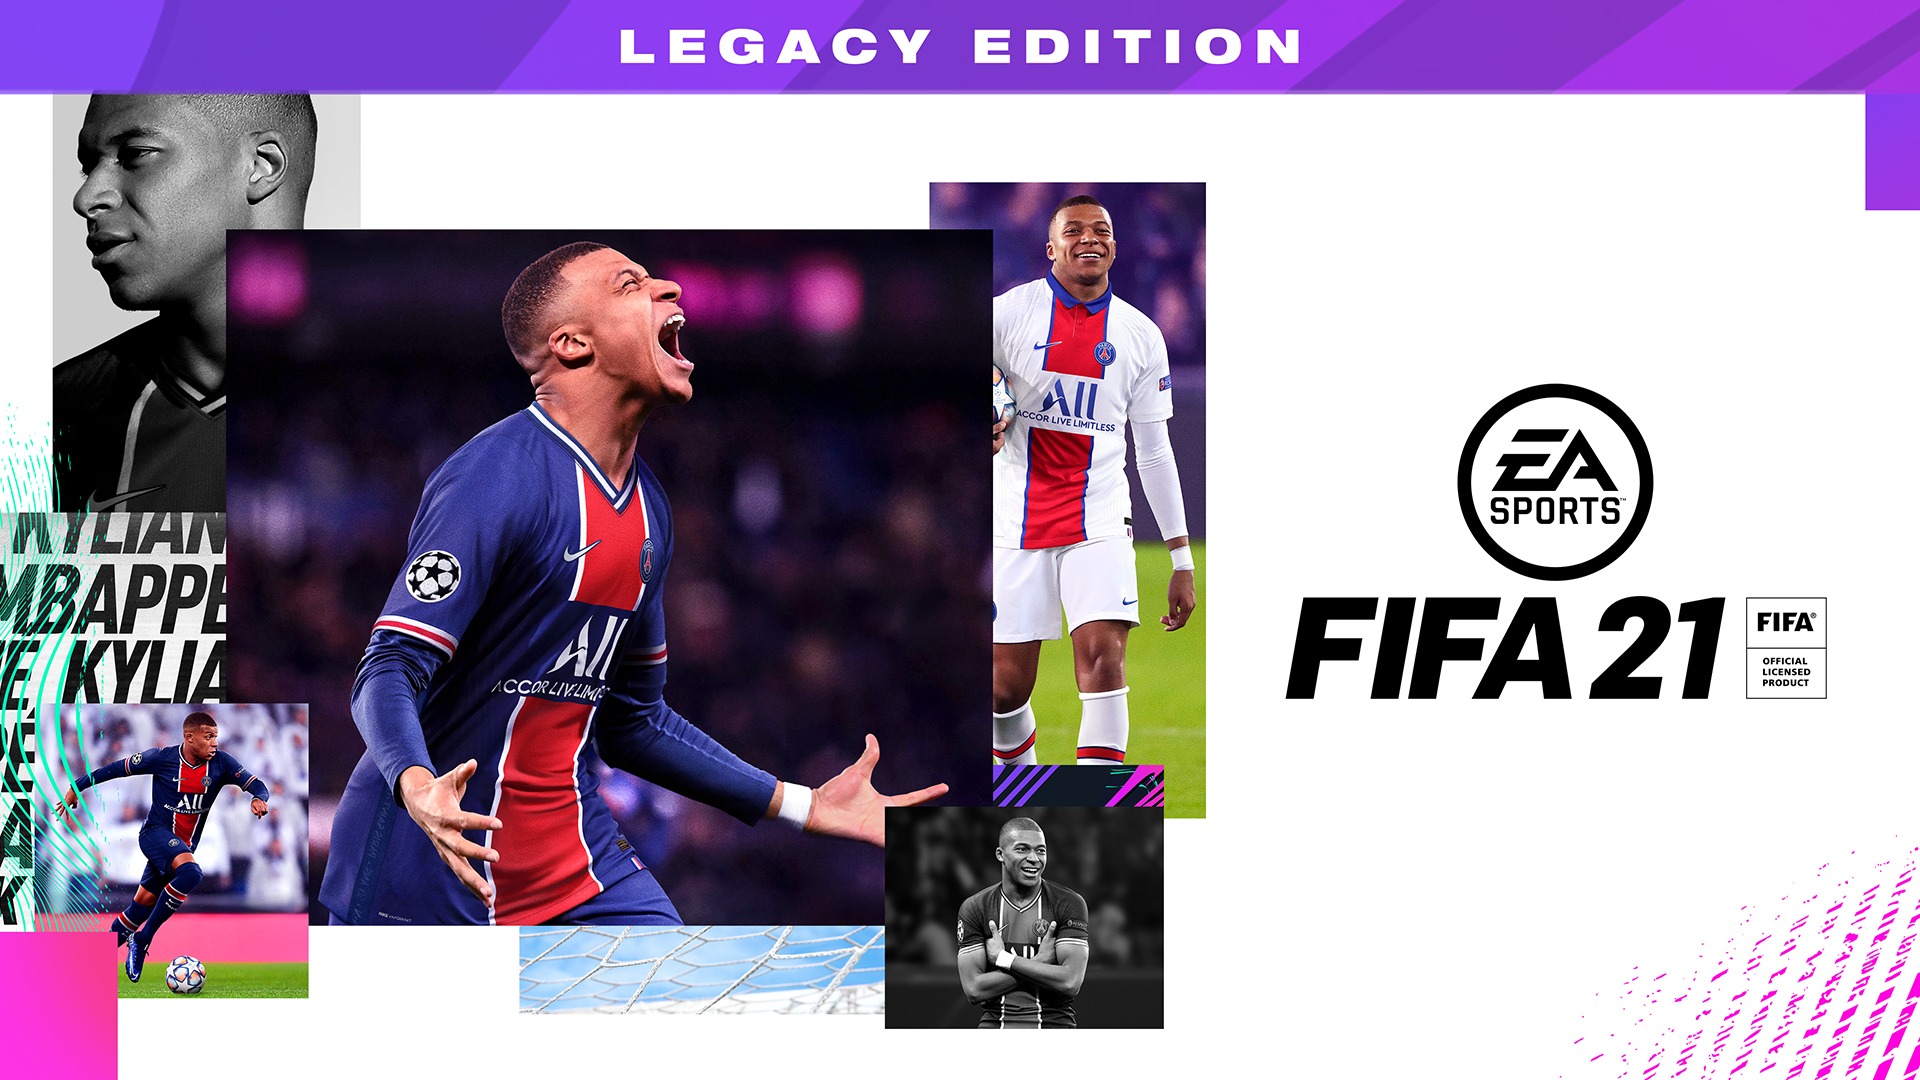 FIFA 21 Ultimate Team Starting Guide - How to Start FUT 21?